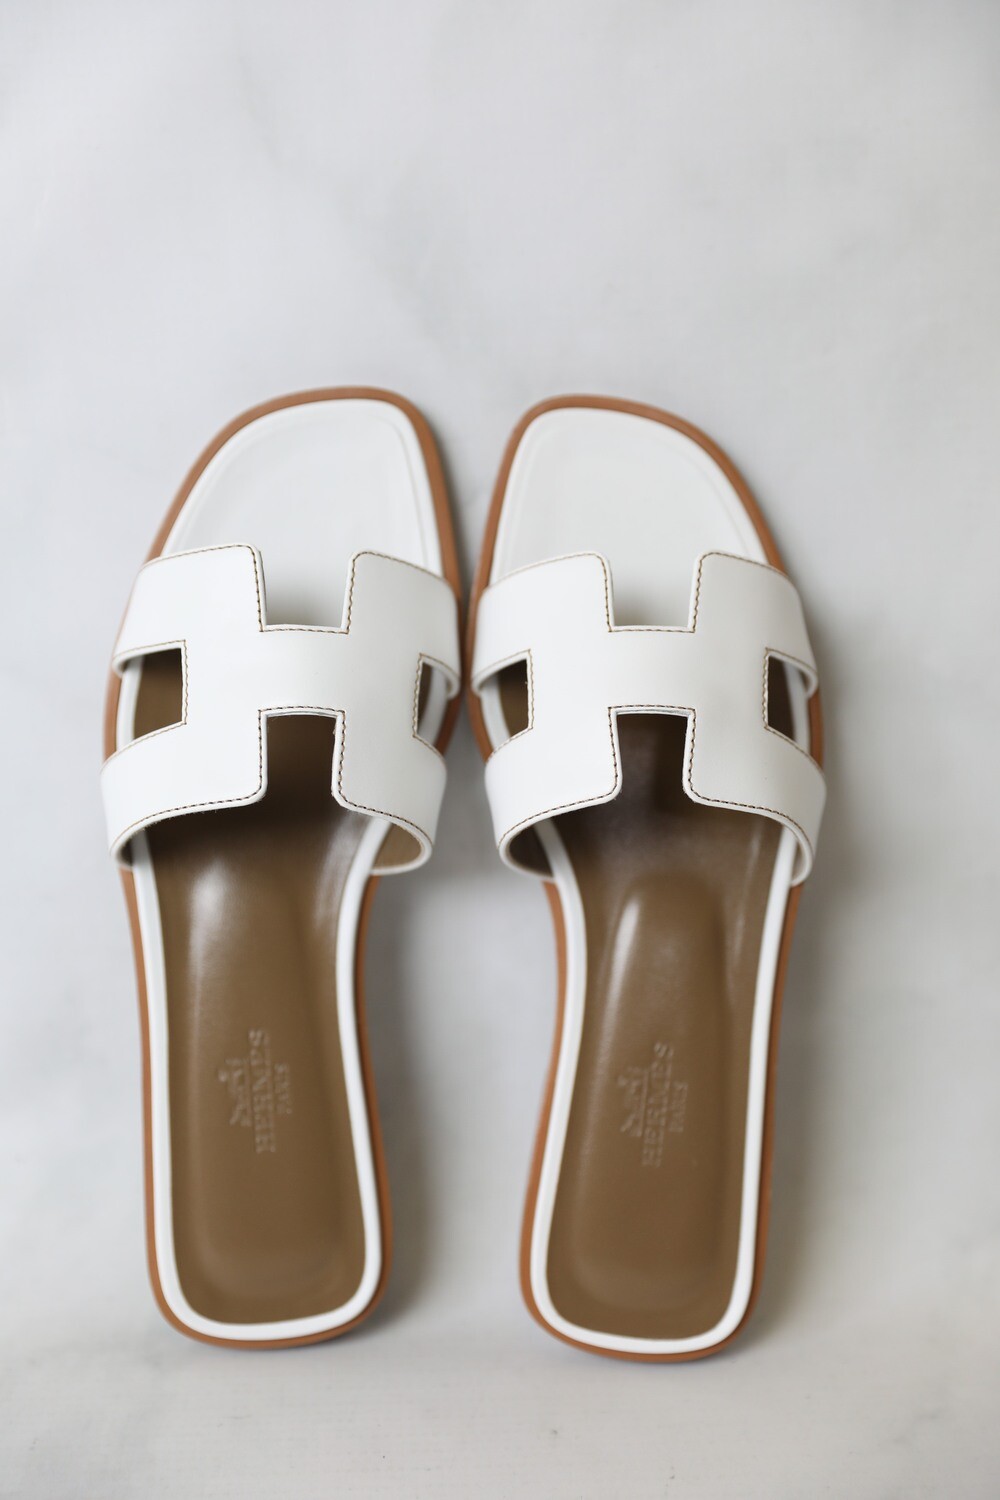 Hermes Shoes Oran Sandals, White, Size 38, New in Box